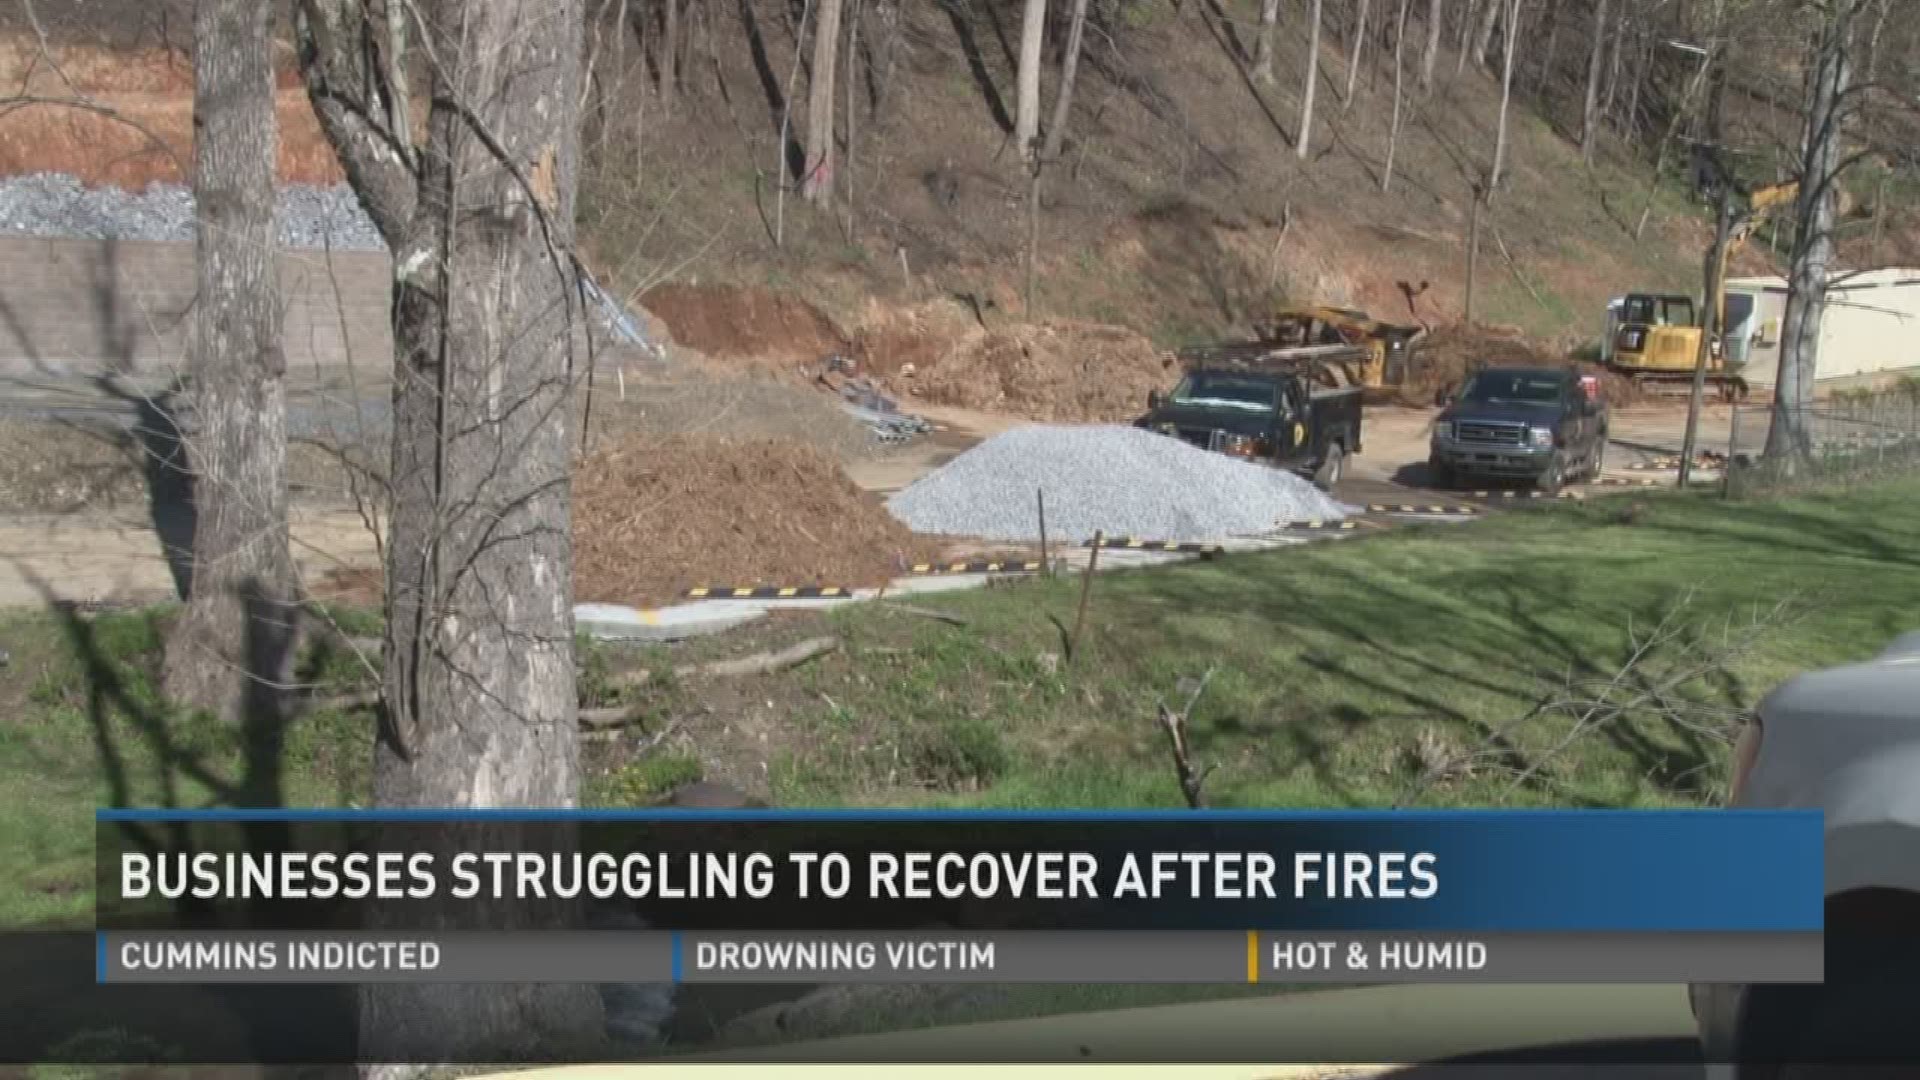 Sevier county businesses are struggling to recover after the wildfires. However, they remain optimistic.